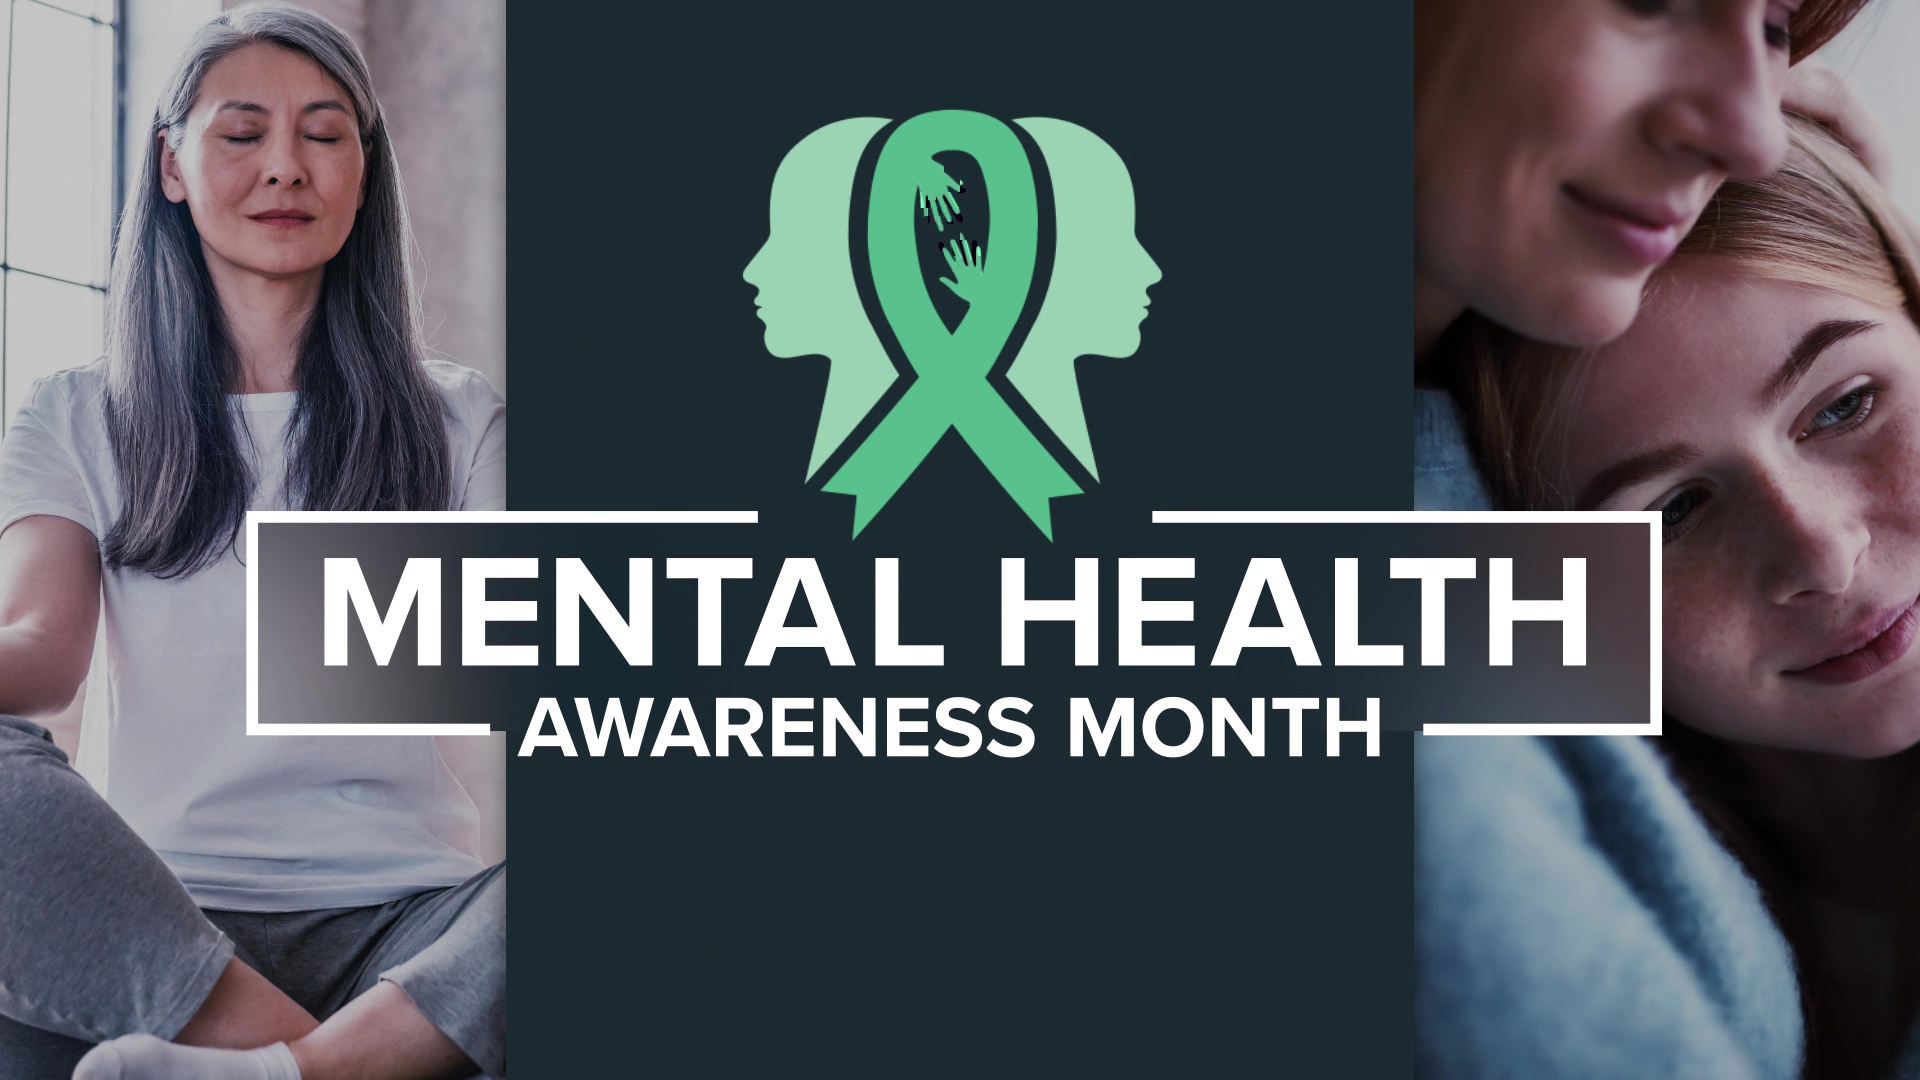 May is Mental Health Awareness Month, a time to raise awareness of those living with mental or behavioral health issues.